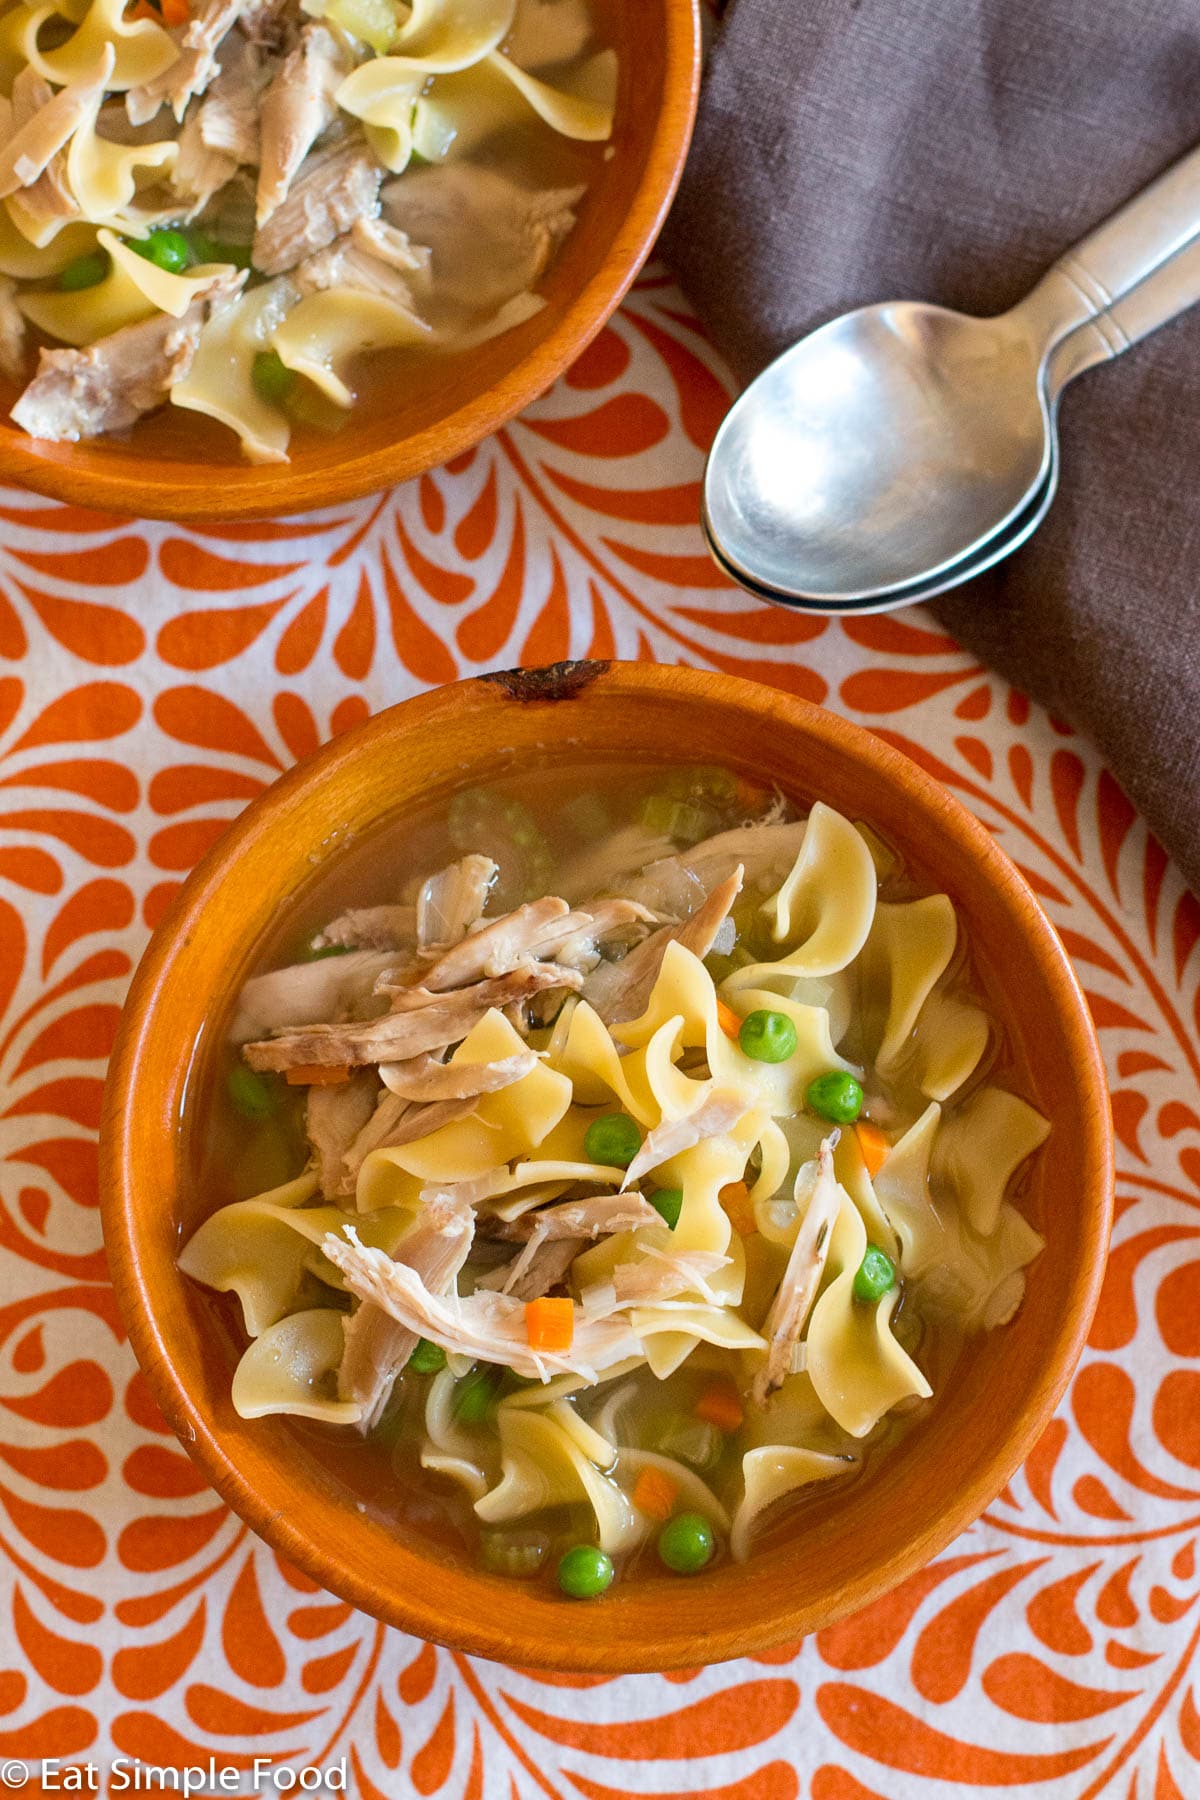 Top view of wood bowl of chicken soup with egg noodles, carrots, and peas.